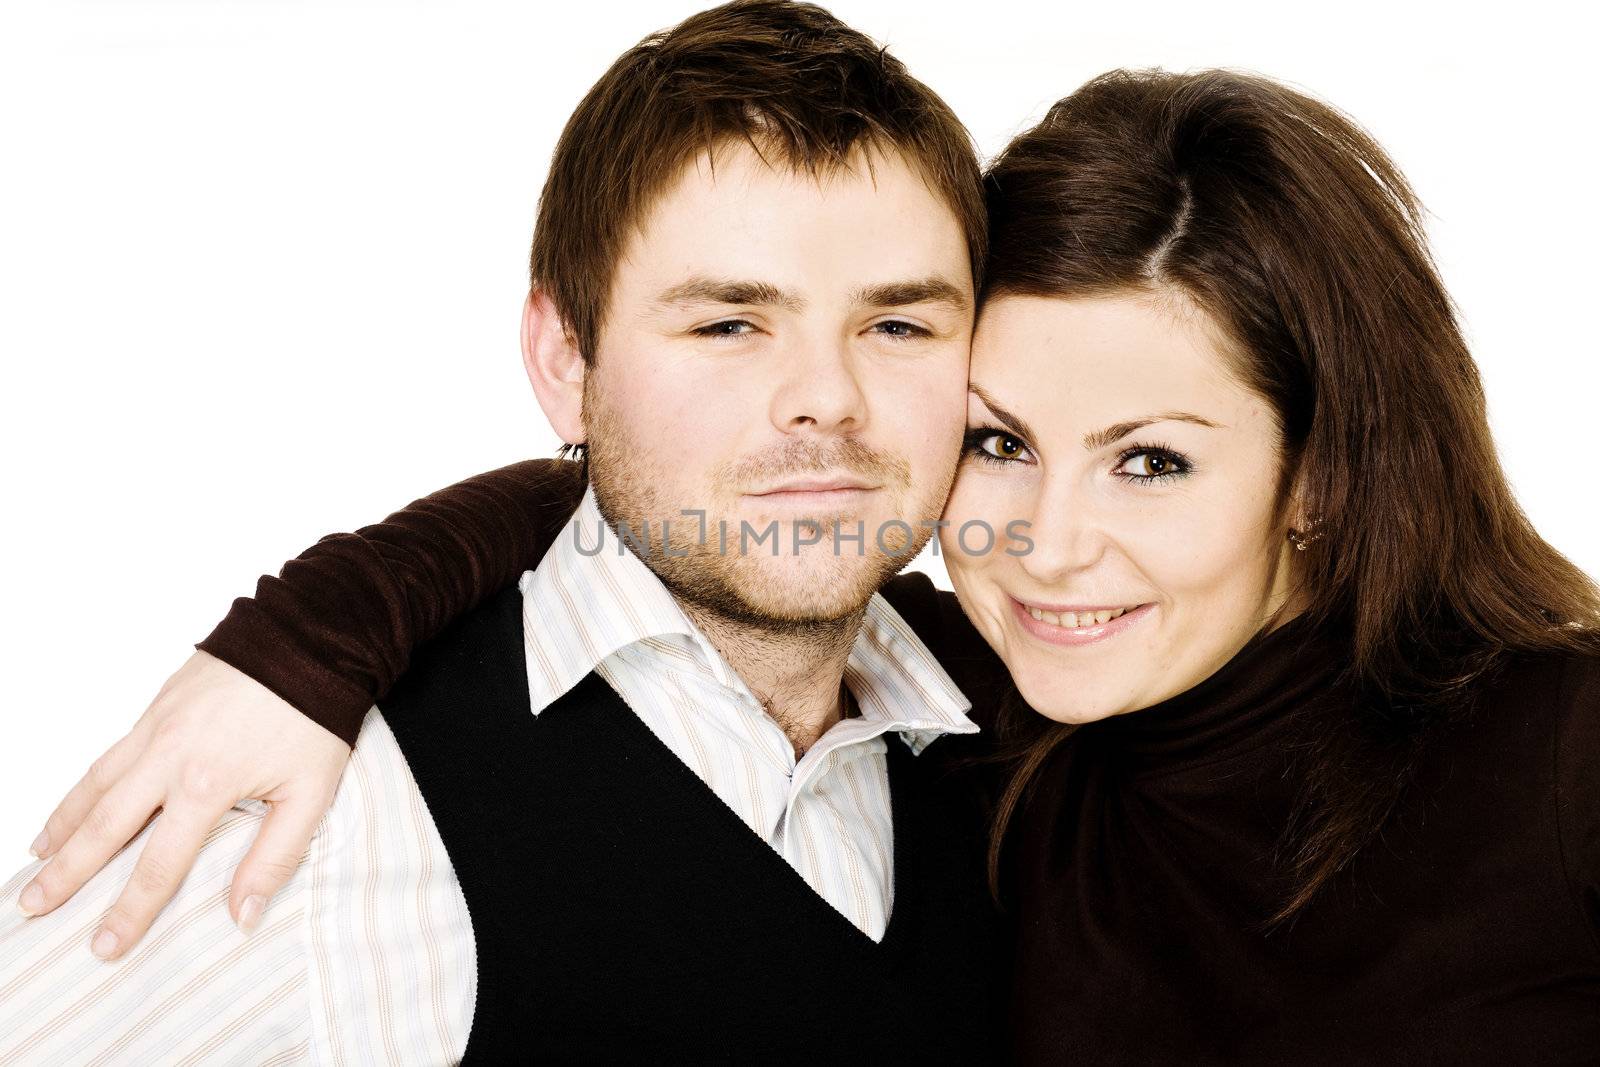 Stock photo: love theme: an image of a man and a woman